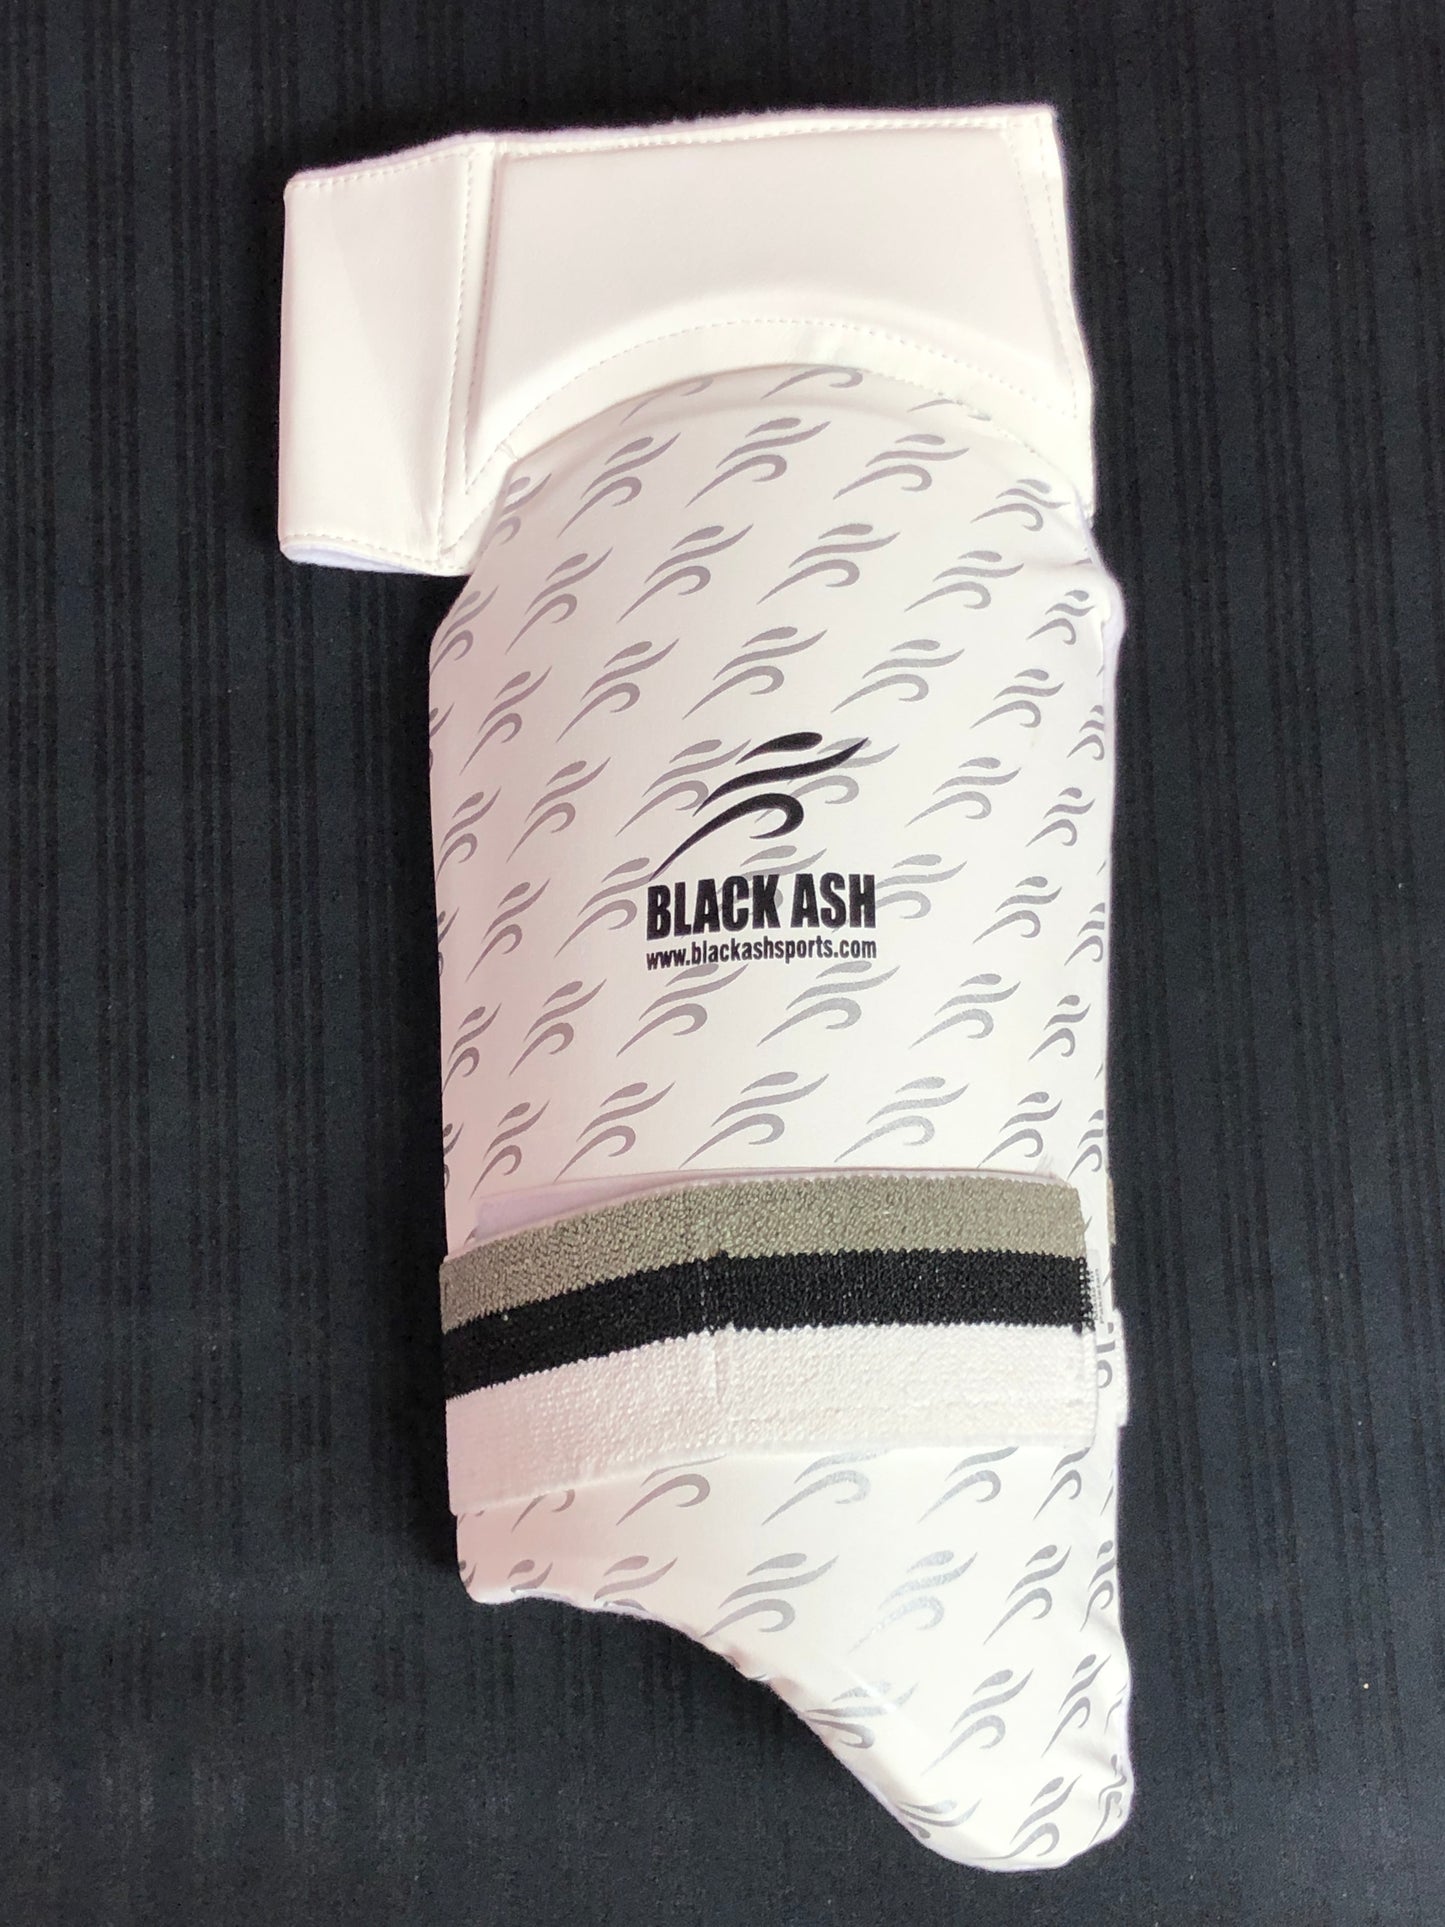 Black Ash combo thigh guard, ultra lightweight with phenomenal protection, designed for professional-level comfort and ease of movement. Features fully adjustable components for a custom fit, Velcro strap with towel lining for comfort, available in multiple sizes from XS to L.